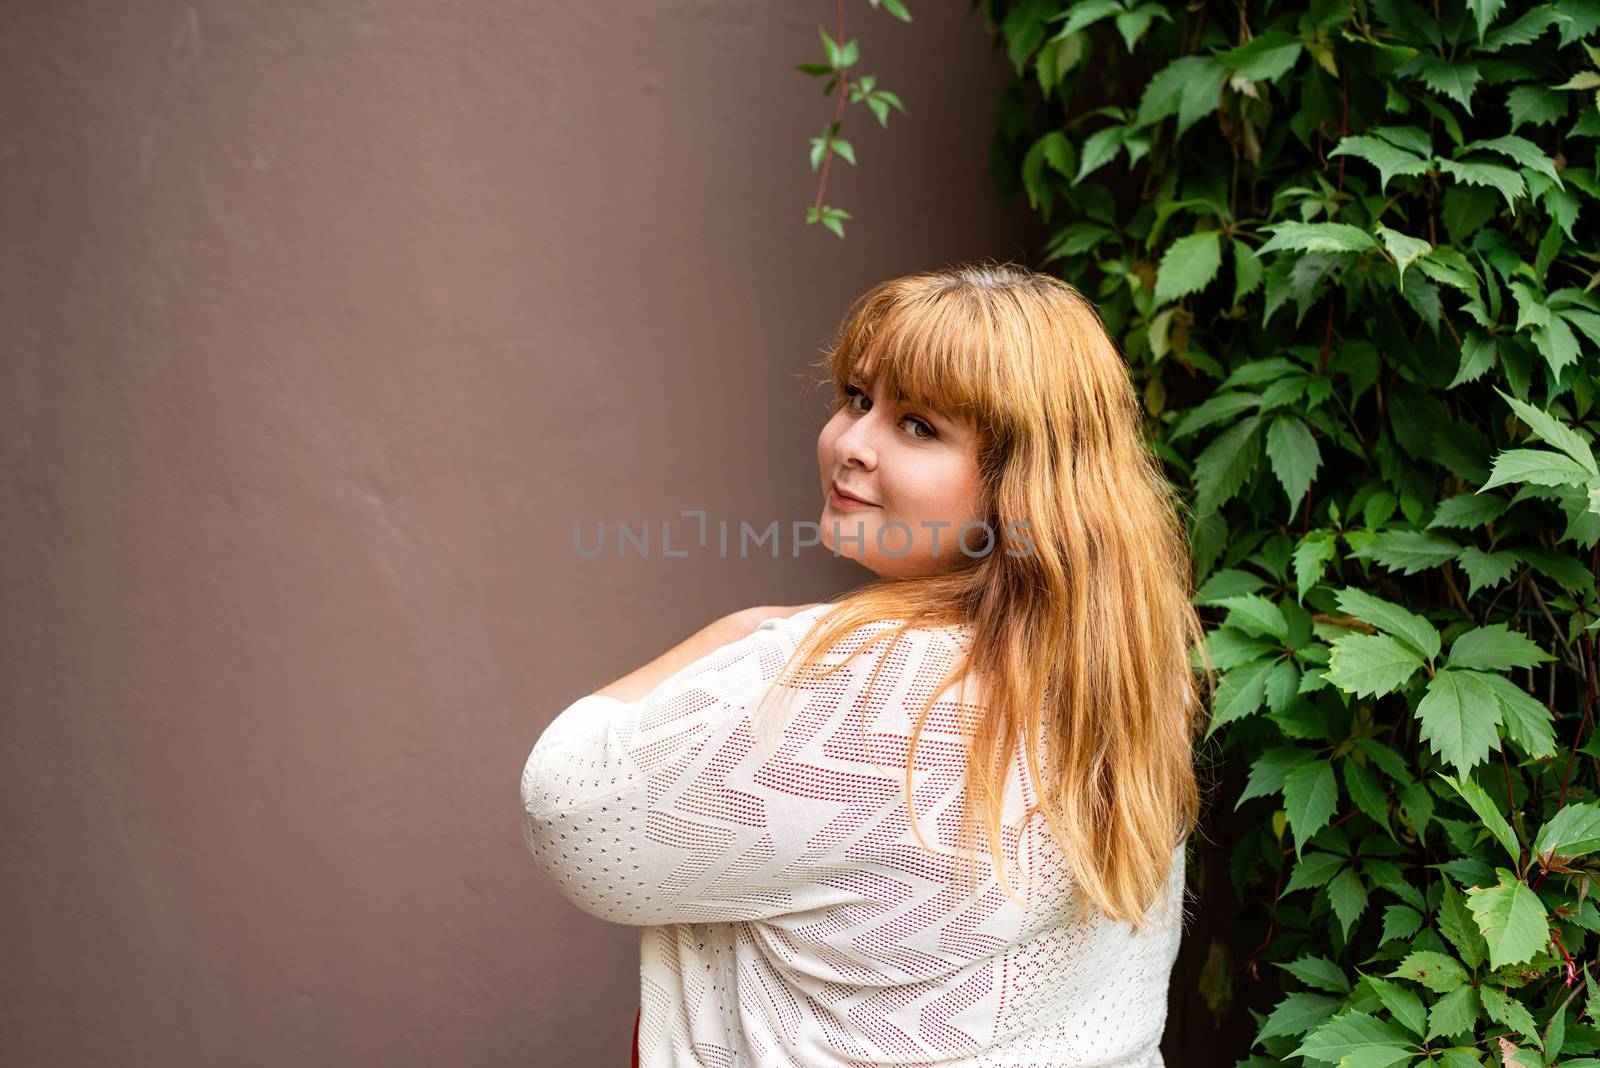 Confident overweight woman posing on the brown solid wall on the street by Desperada